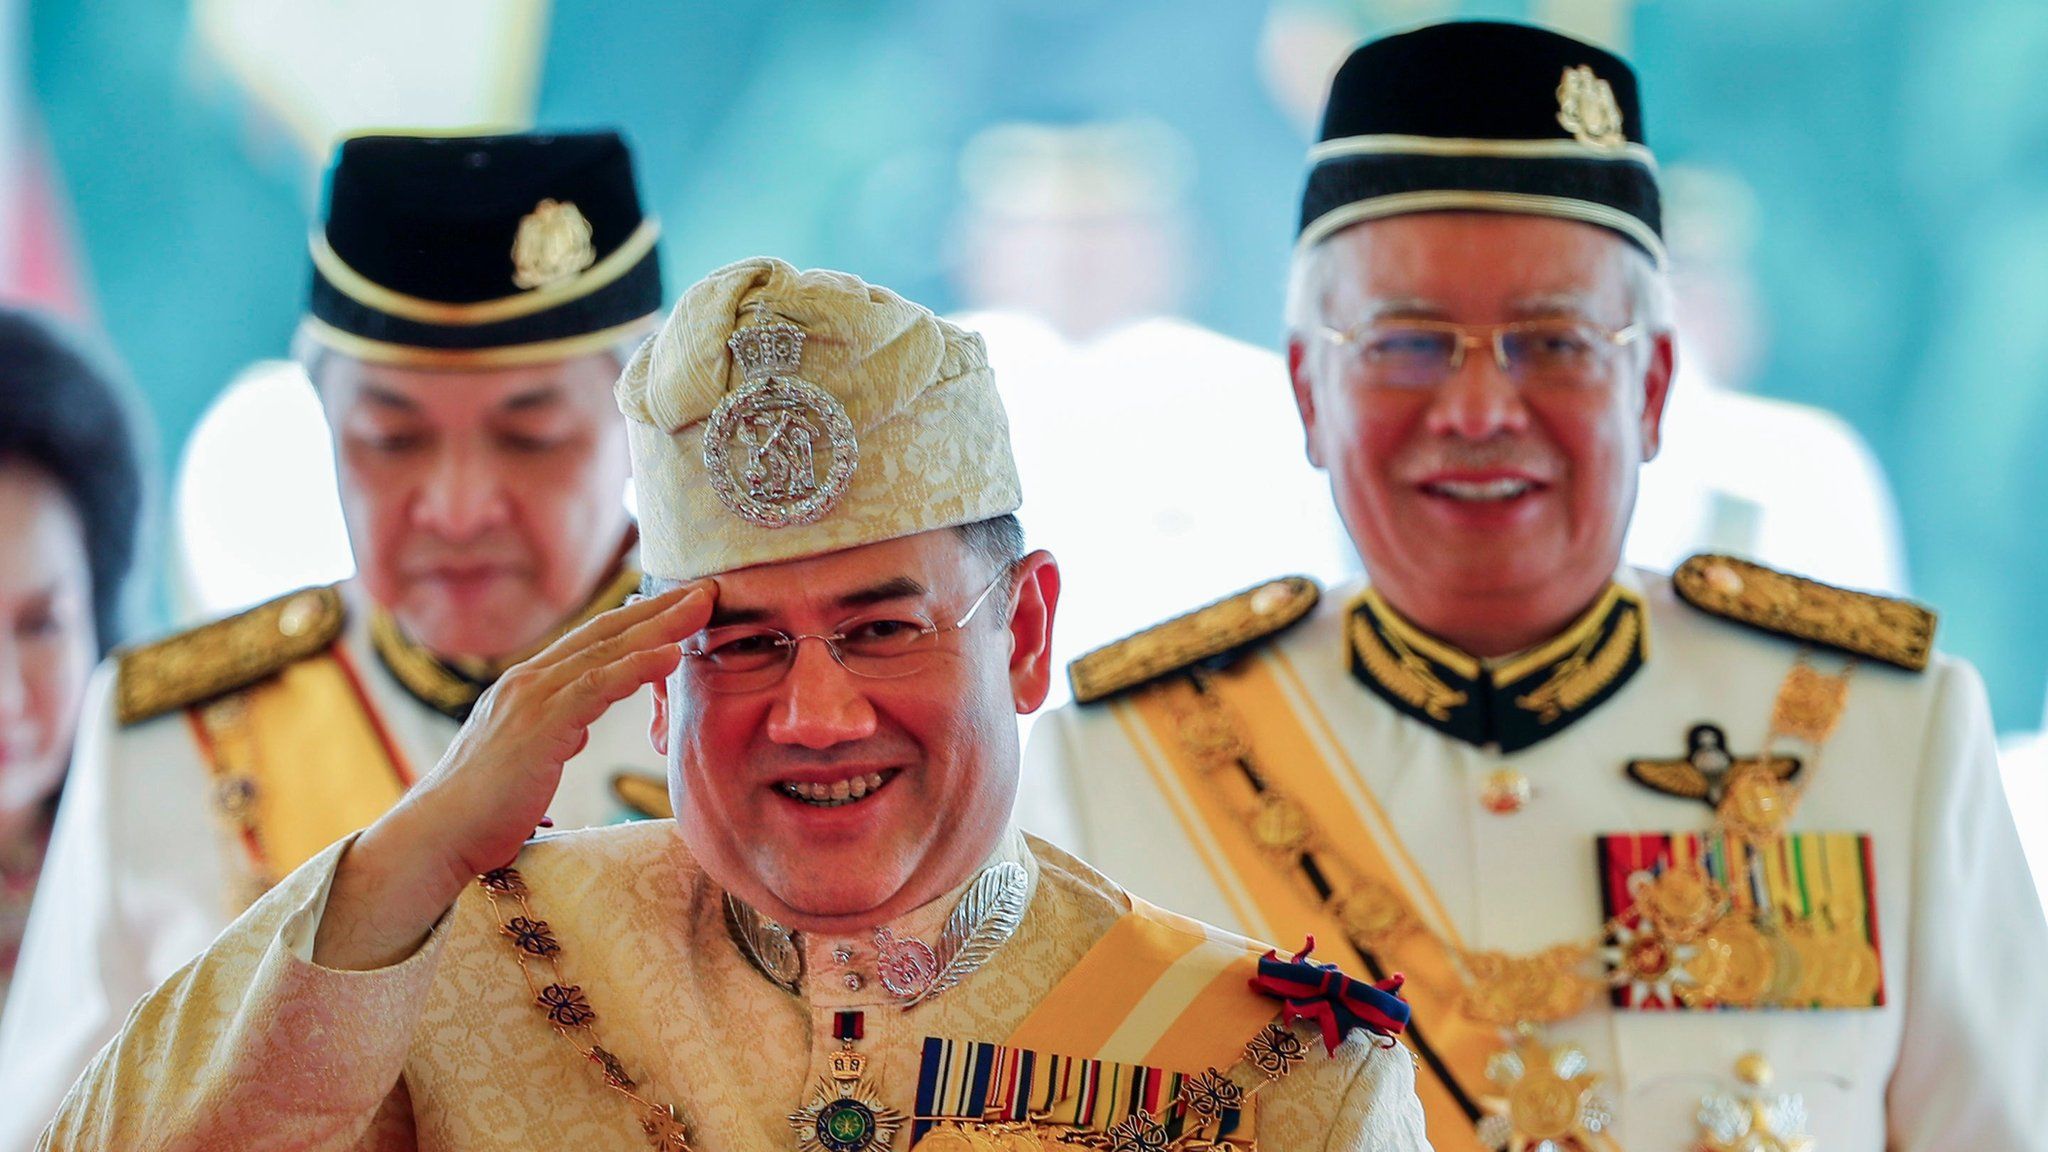 Sultan Muhammad V, centre, salutes after his welcome ceremony as he walks with Malaysian Prime Minister Najib Razak, right, at the Parliament House in Kuala Lumpur, Malaysia, 13 December 2016.